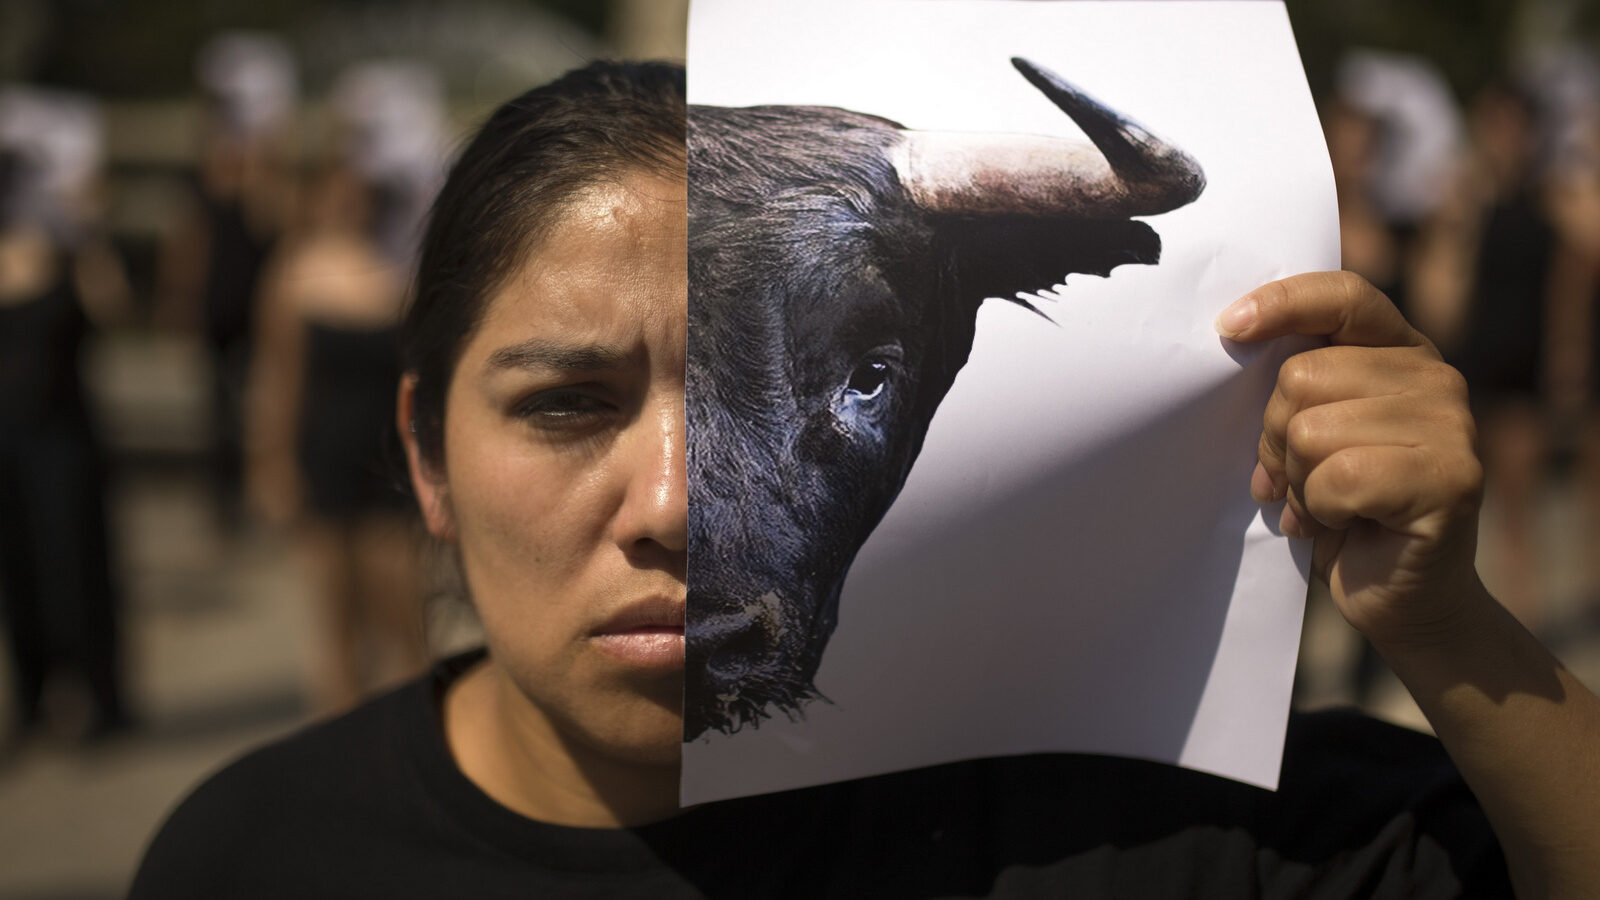 A woman holds up a picture of a bull during a protest against bullfighting in Madrid, June 21, 2017. For some people bullfighting is a traditional spectacle in Spain but animal rights activists see it as torture against animals. (AP/Francisco Seco)